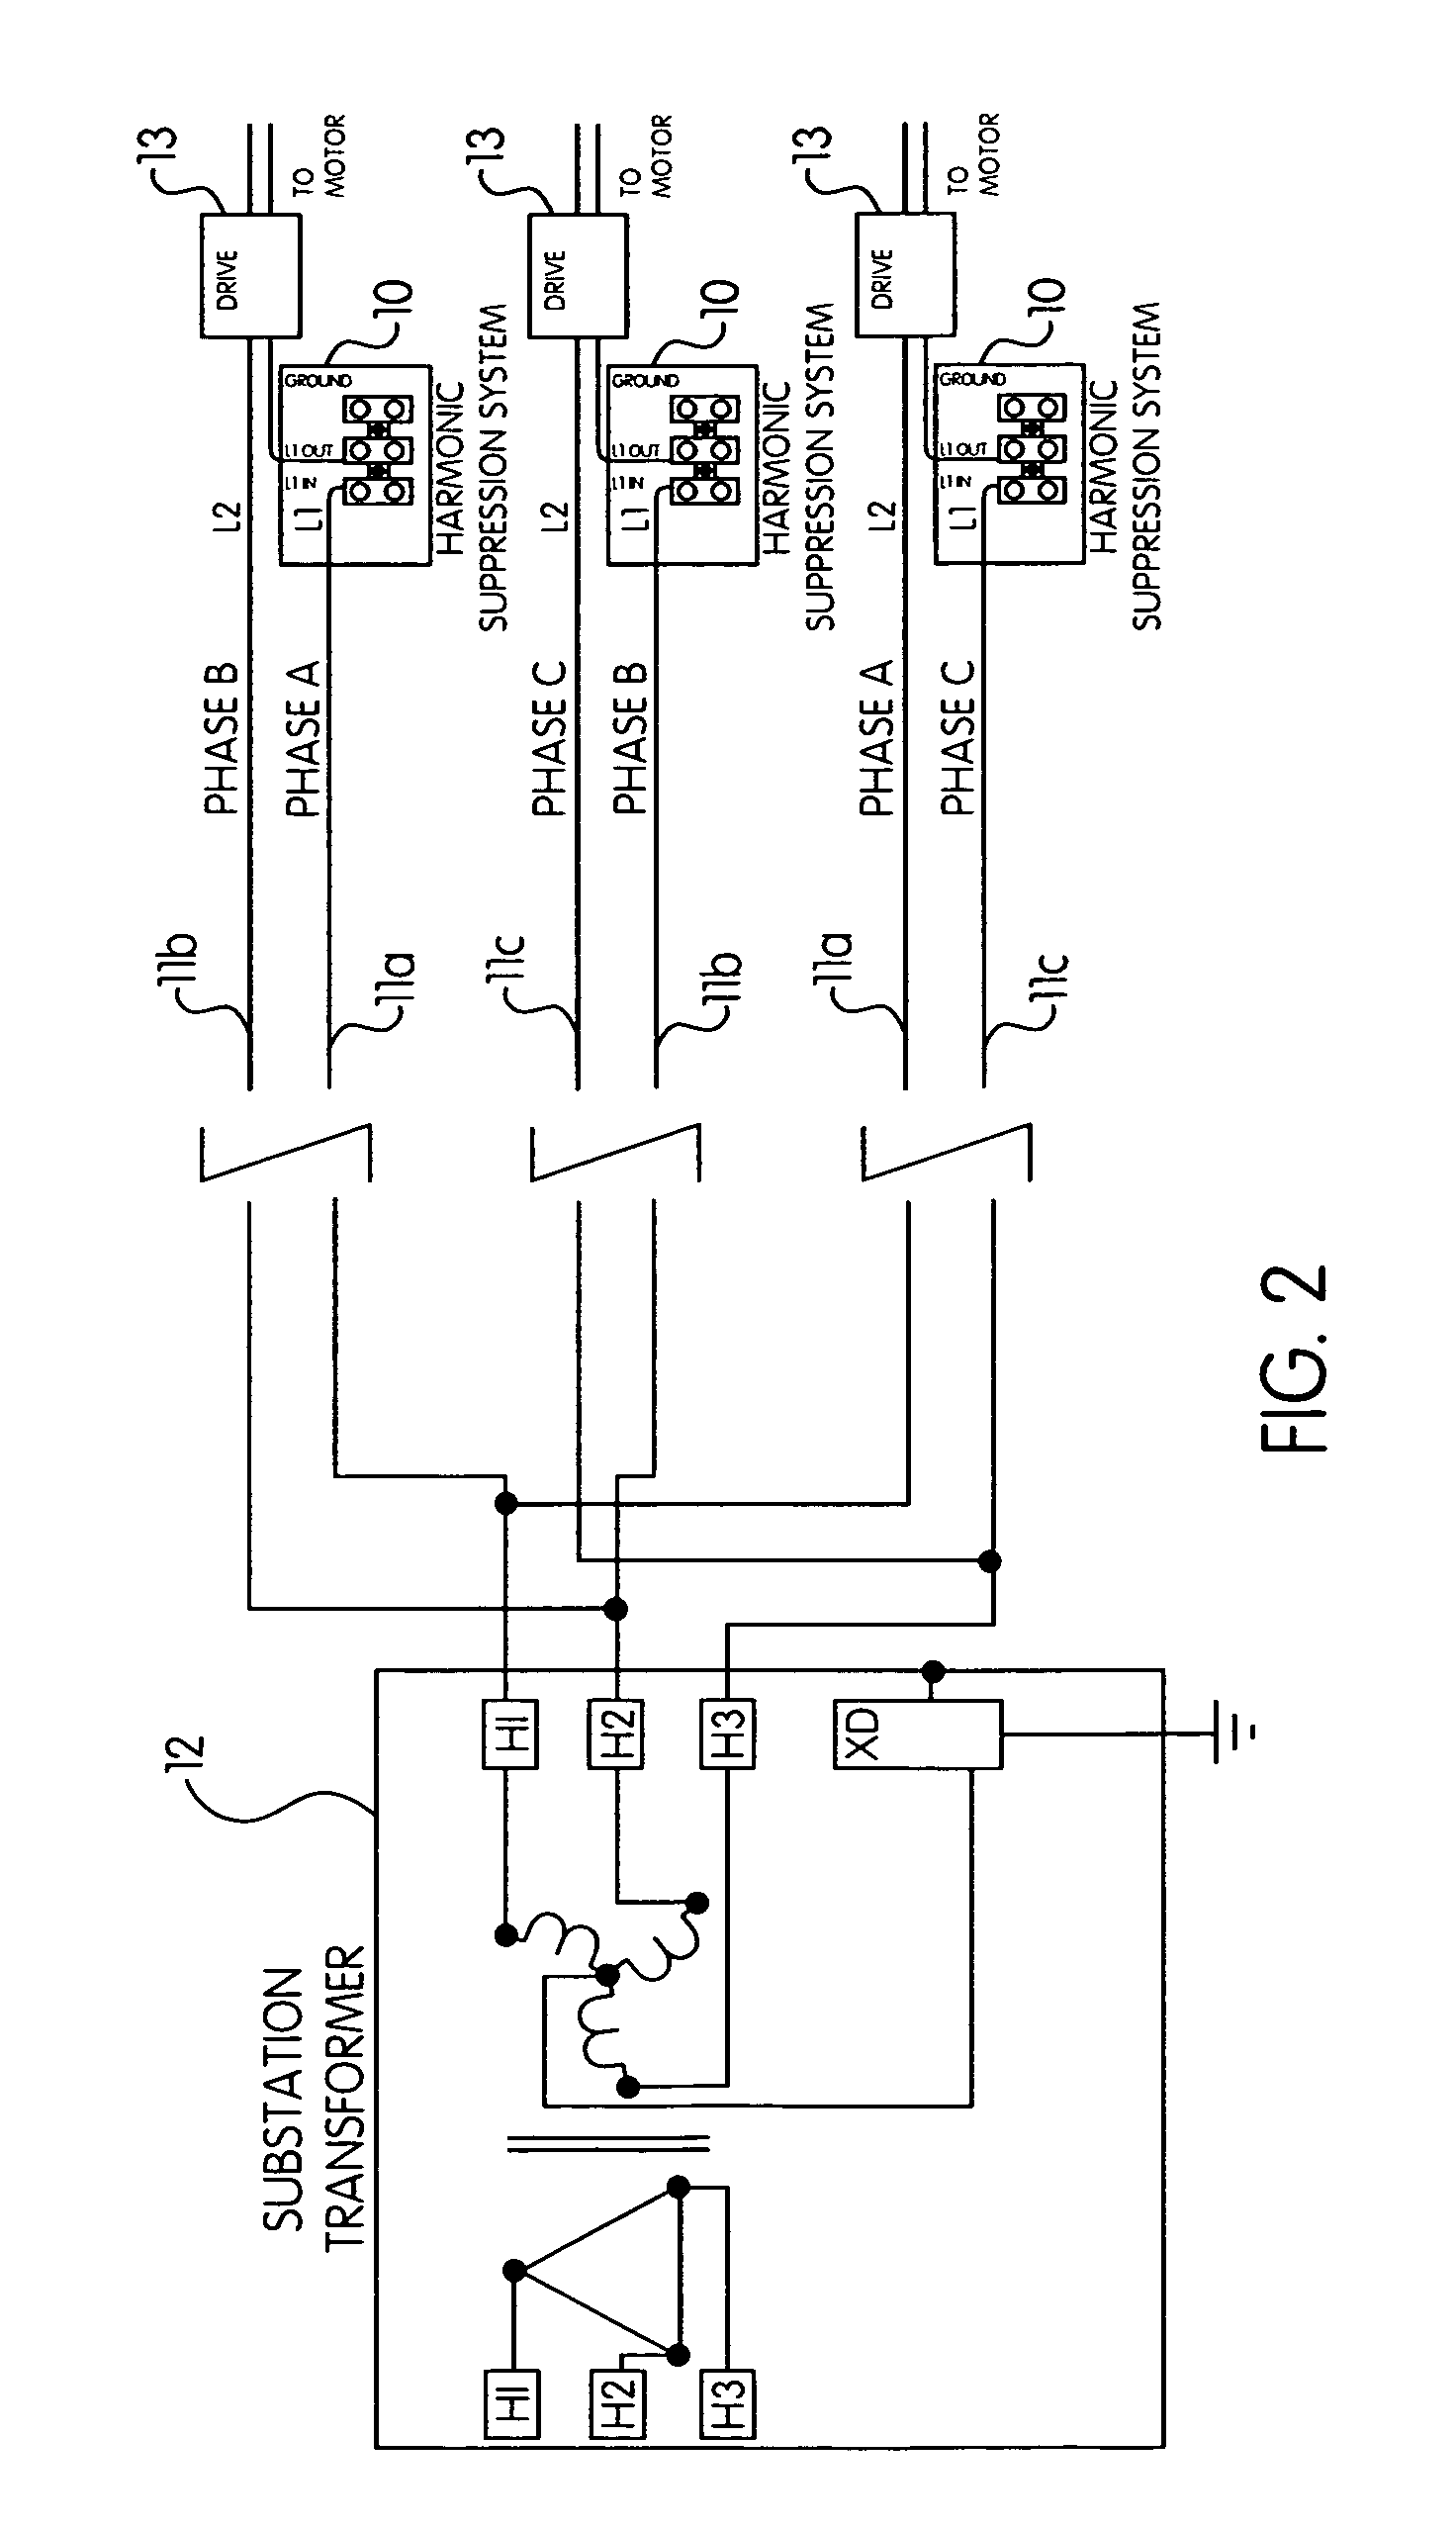 Electrical harmonic suppression system and enclosure for the same